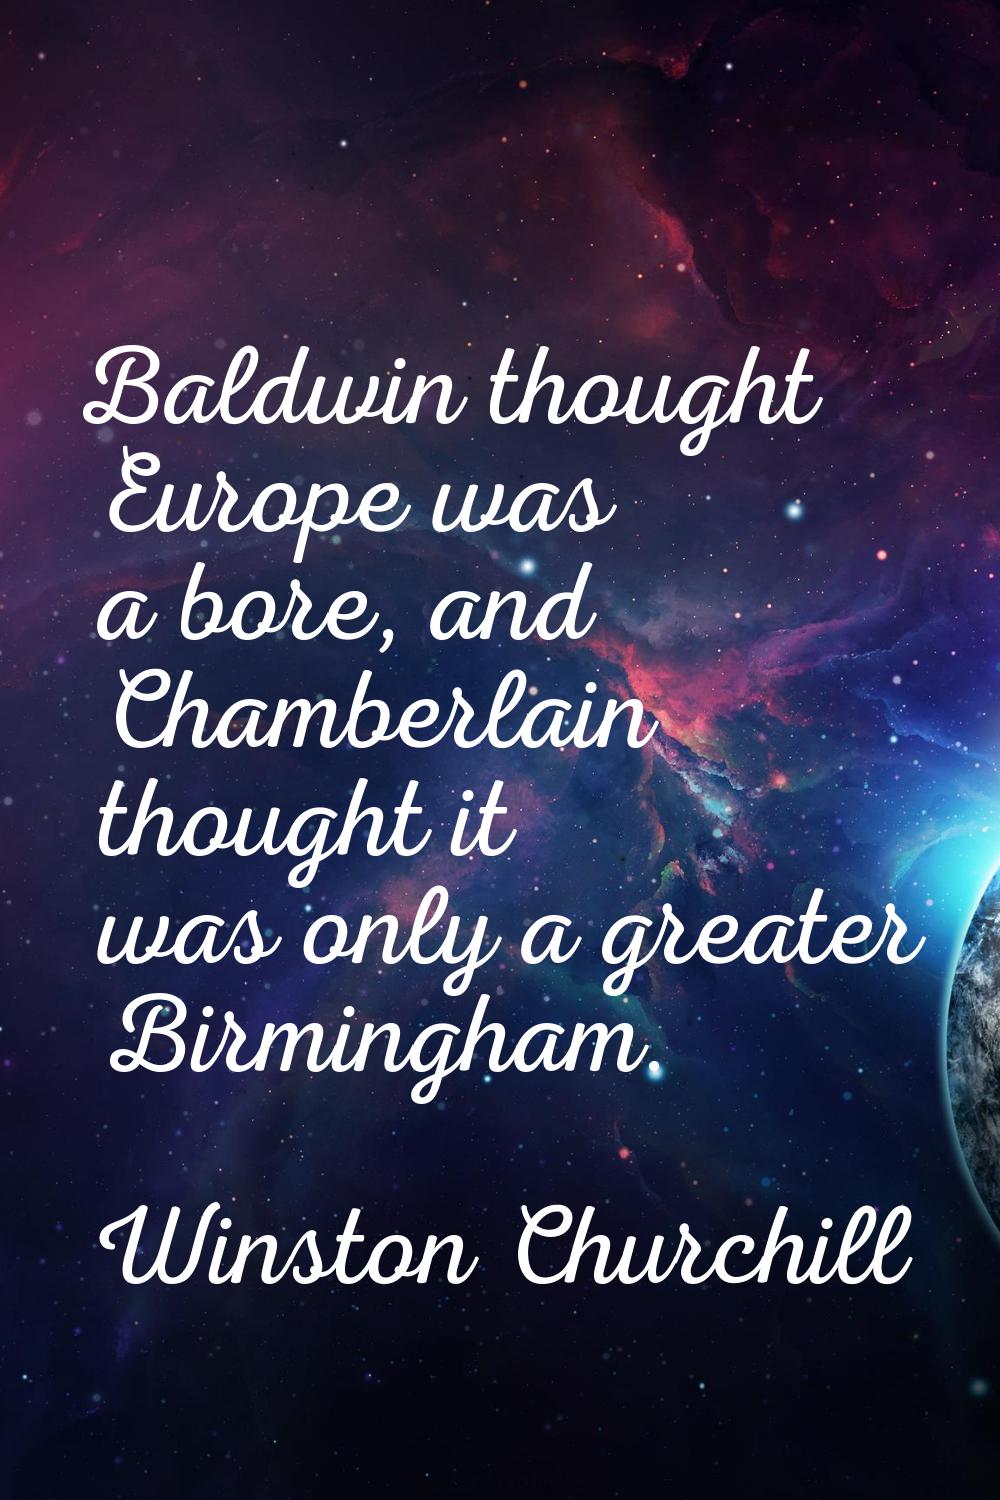 Baldwin thought Europe was a bore, and Chamberlain thought it was only a greater Birmingham.